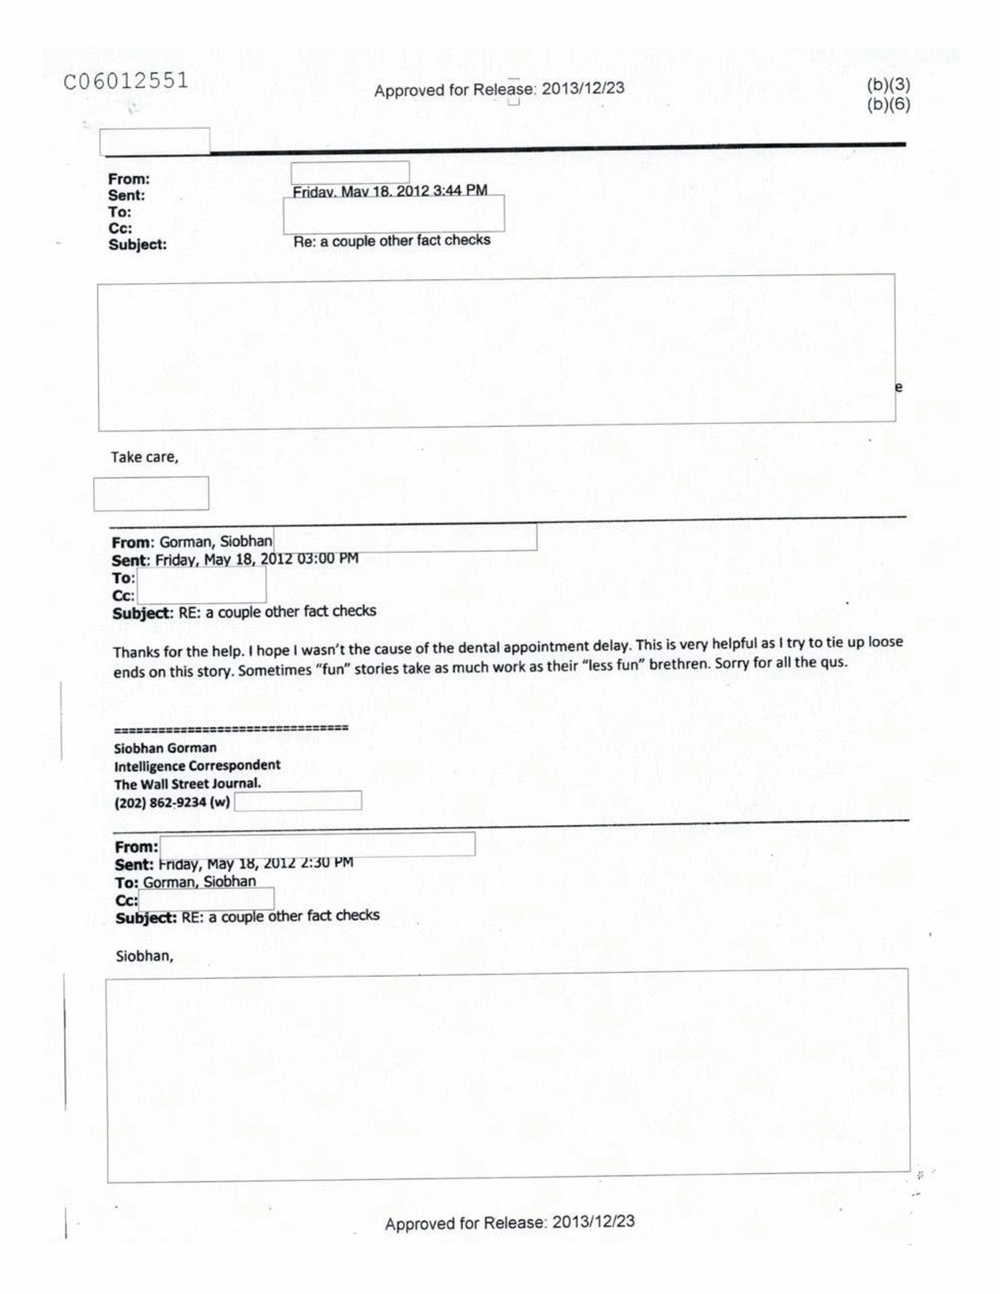 Page 87 from Email Correspondence Between Reporters and CIA Flacks